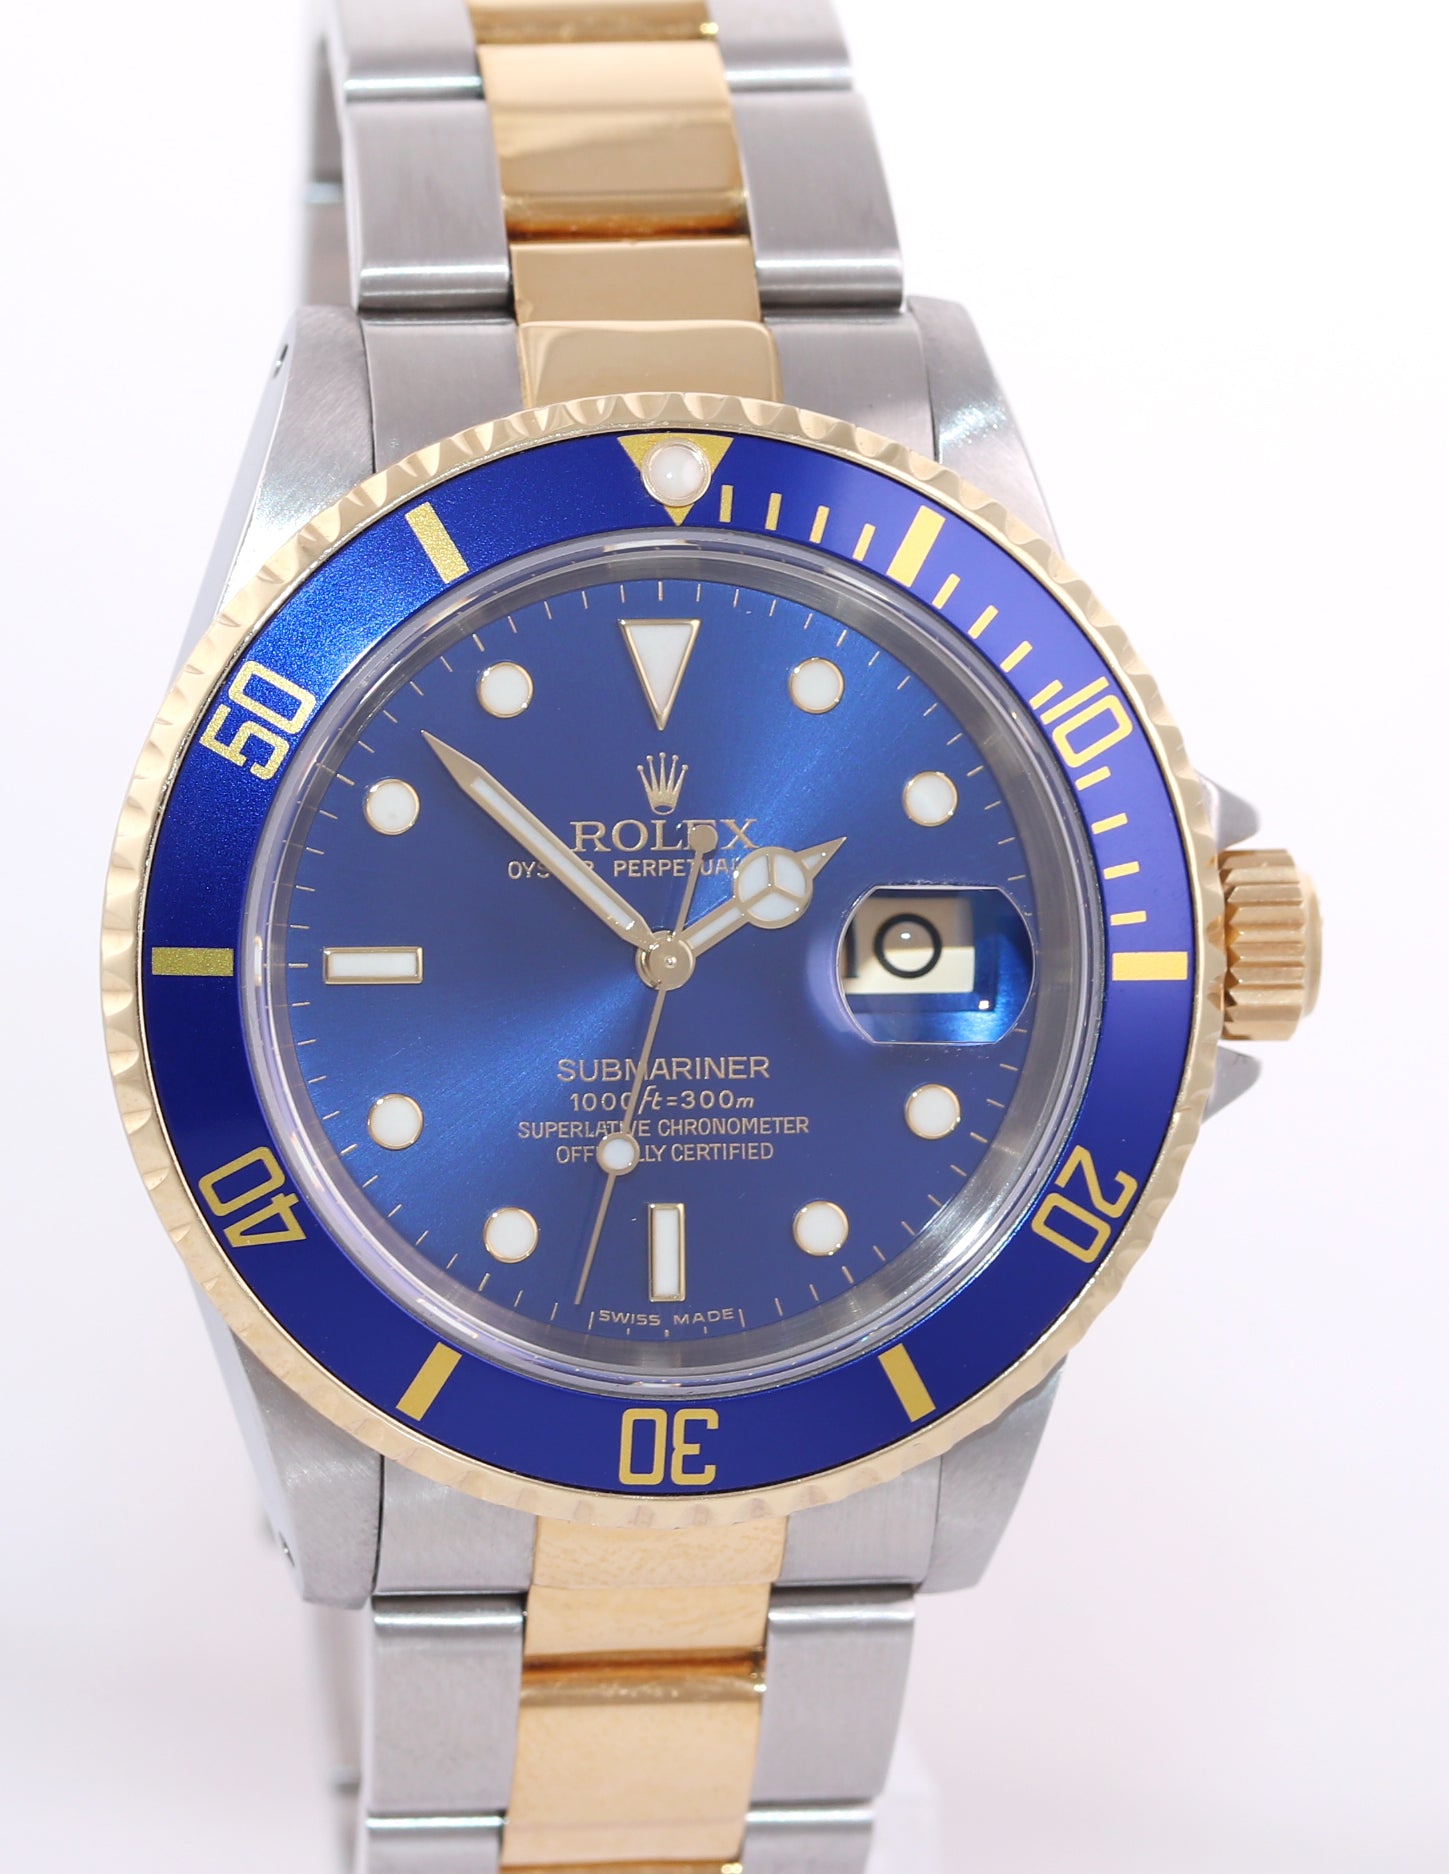 2018 RSC PAPERS Rolex Submariner 16613 Two Tone Steel 18k Gold Blue Watch Box